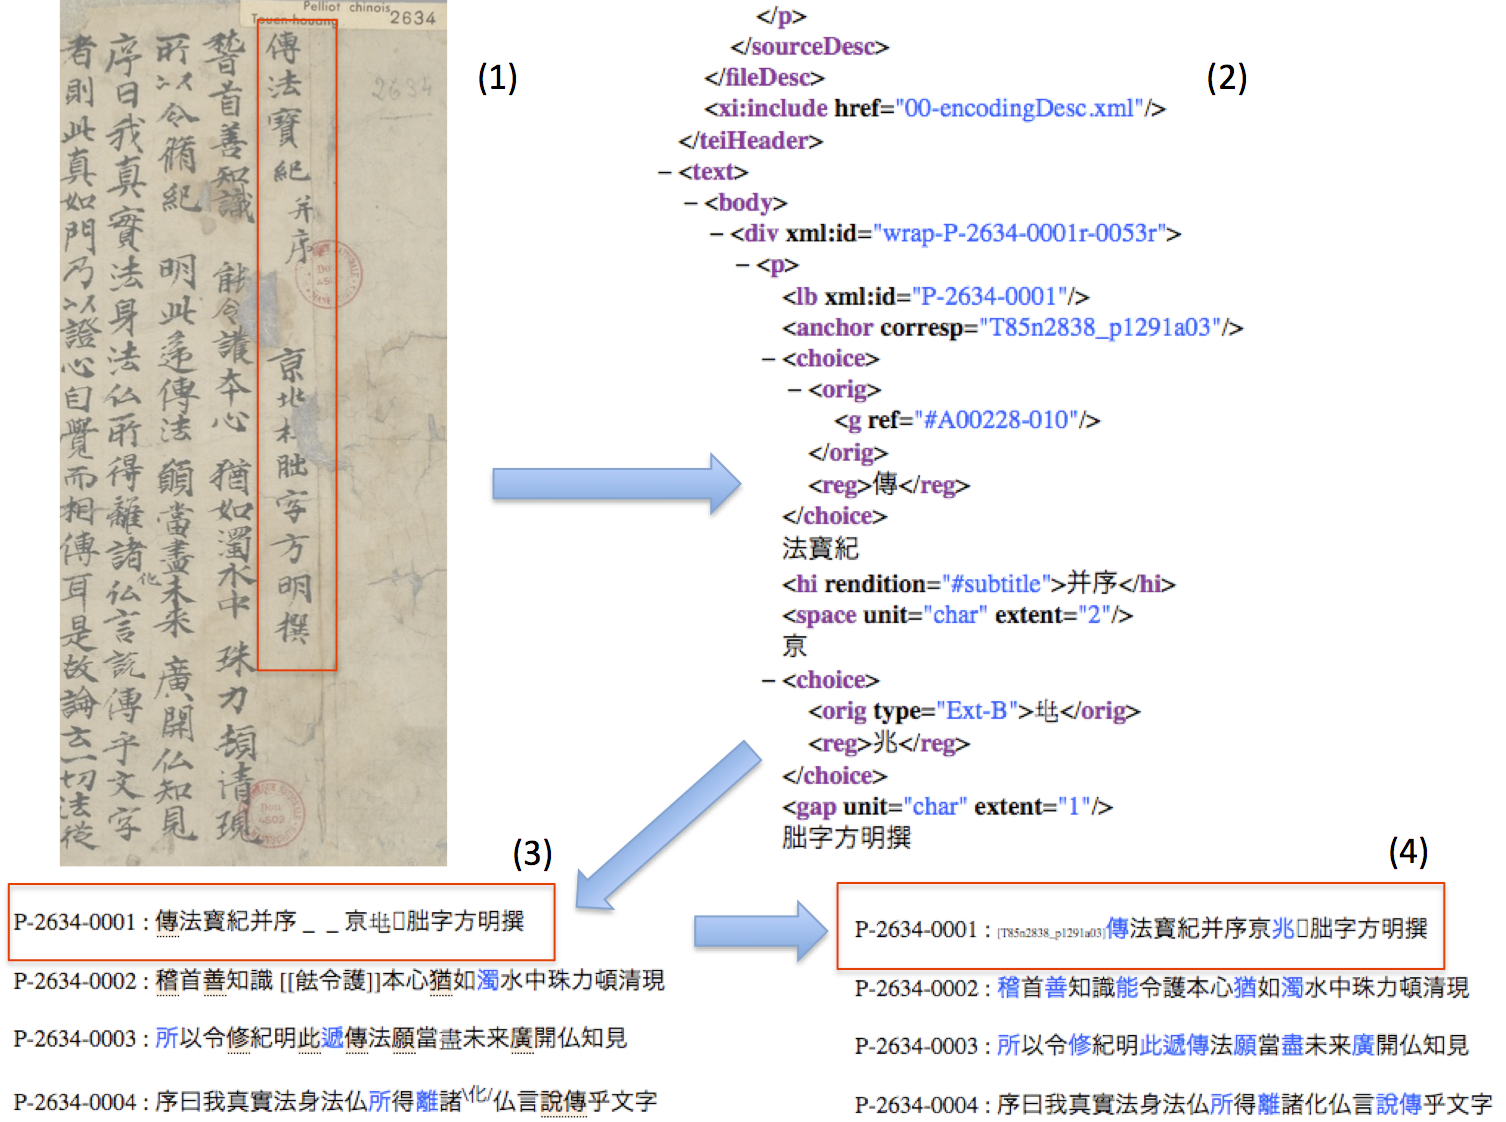 Example of the process of transcription and encoding of line 1 of ms. Pelliot 2634: (1) The first line of the manuscript facsimile is indicated by the red box; (2) shows the encoding of the first line into TEI-compatible XML in oXygen; (3) the red box shows the transformation of (2) into a html webpage, directly reflecting the features of the manuscript (“diplomatic version”); (4) shows a html transformation of (2) into “normalized” text (“regularized version”); this version is the basis for further work on the manuscripts (e.g., annotations; translations; grammatical analysis).